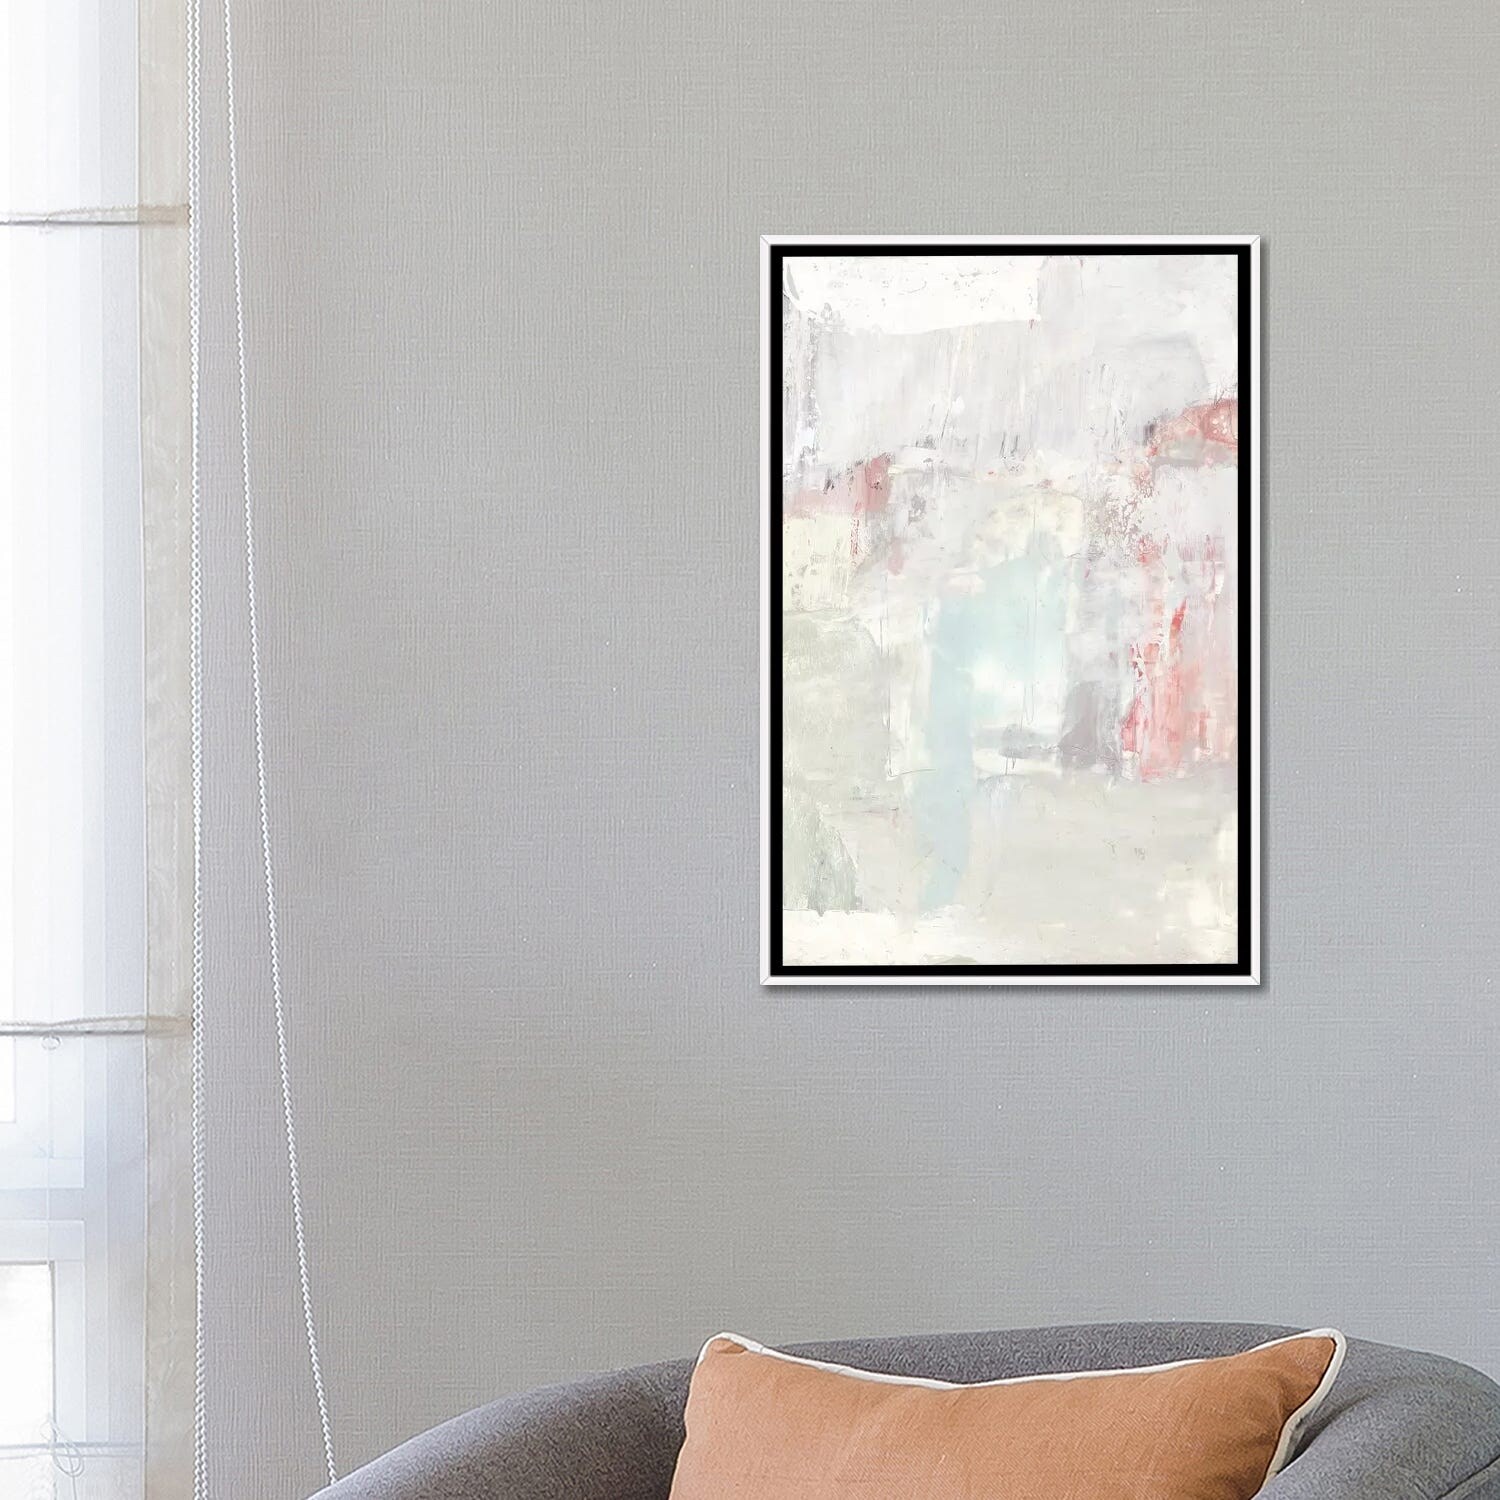 iCanvas "Barely There II" by Victoria Borges Framed